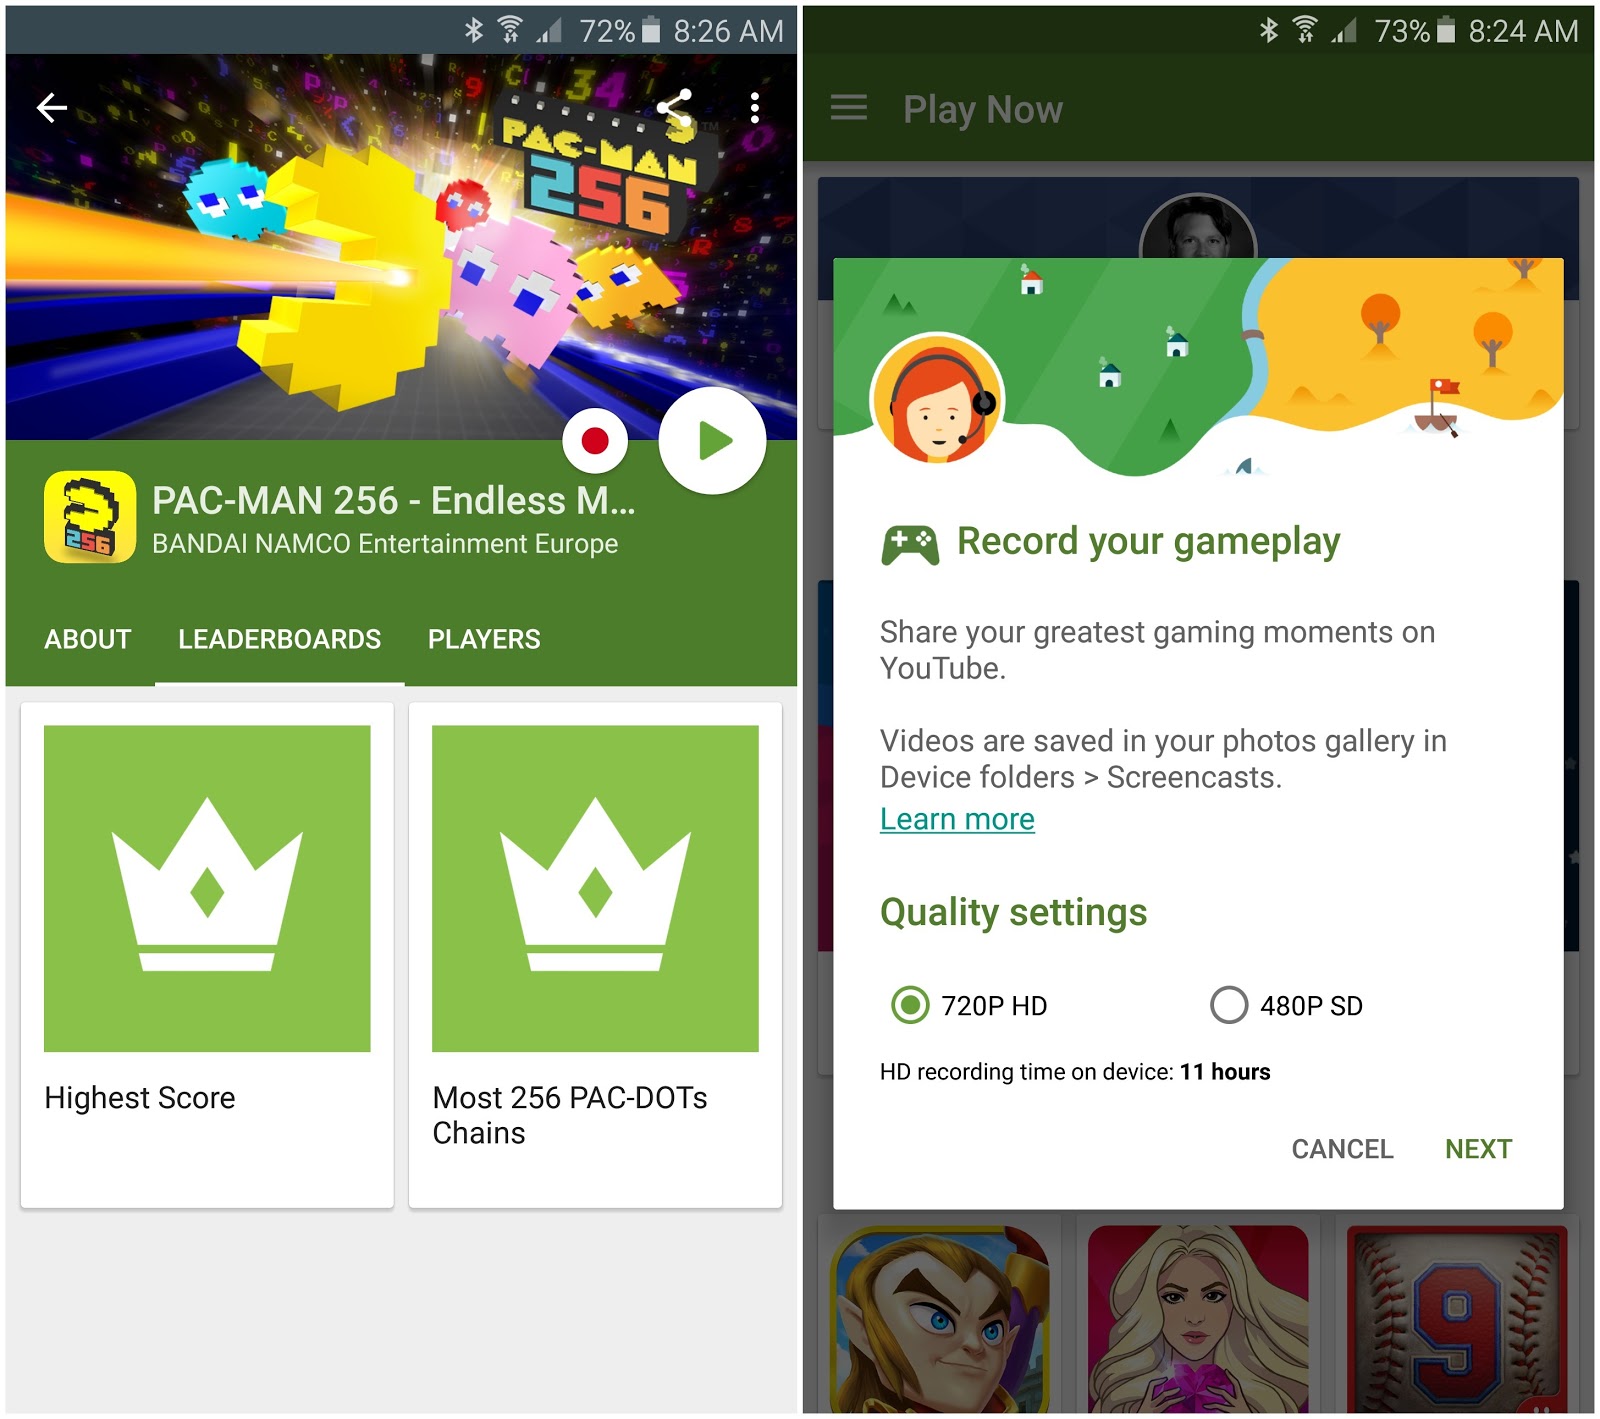 Google Play Games Now Lets You Record And Share Gameplay